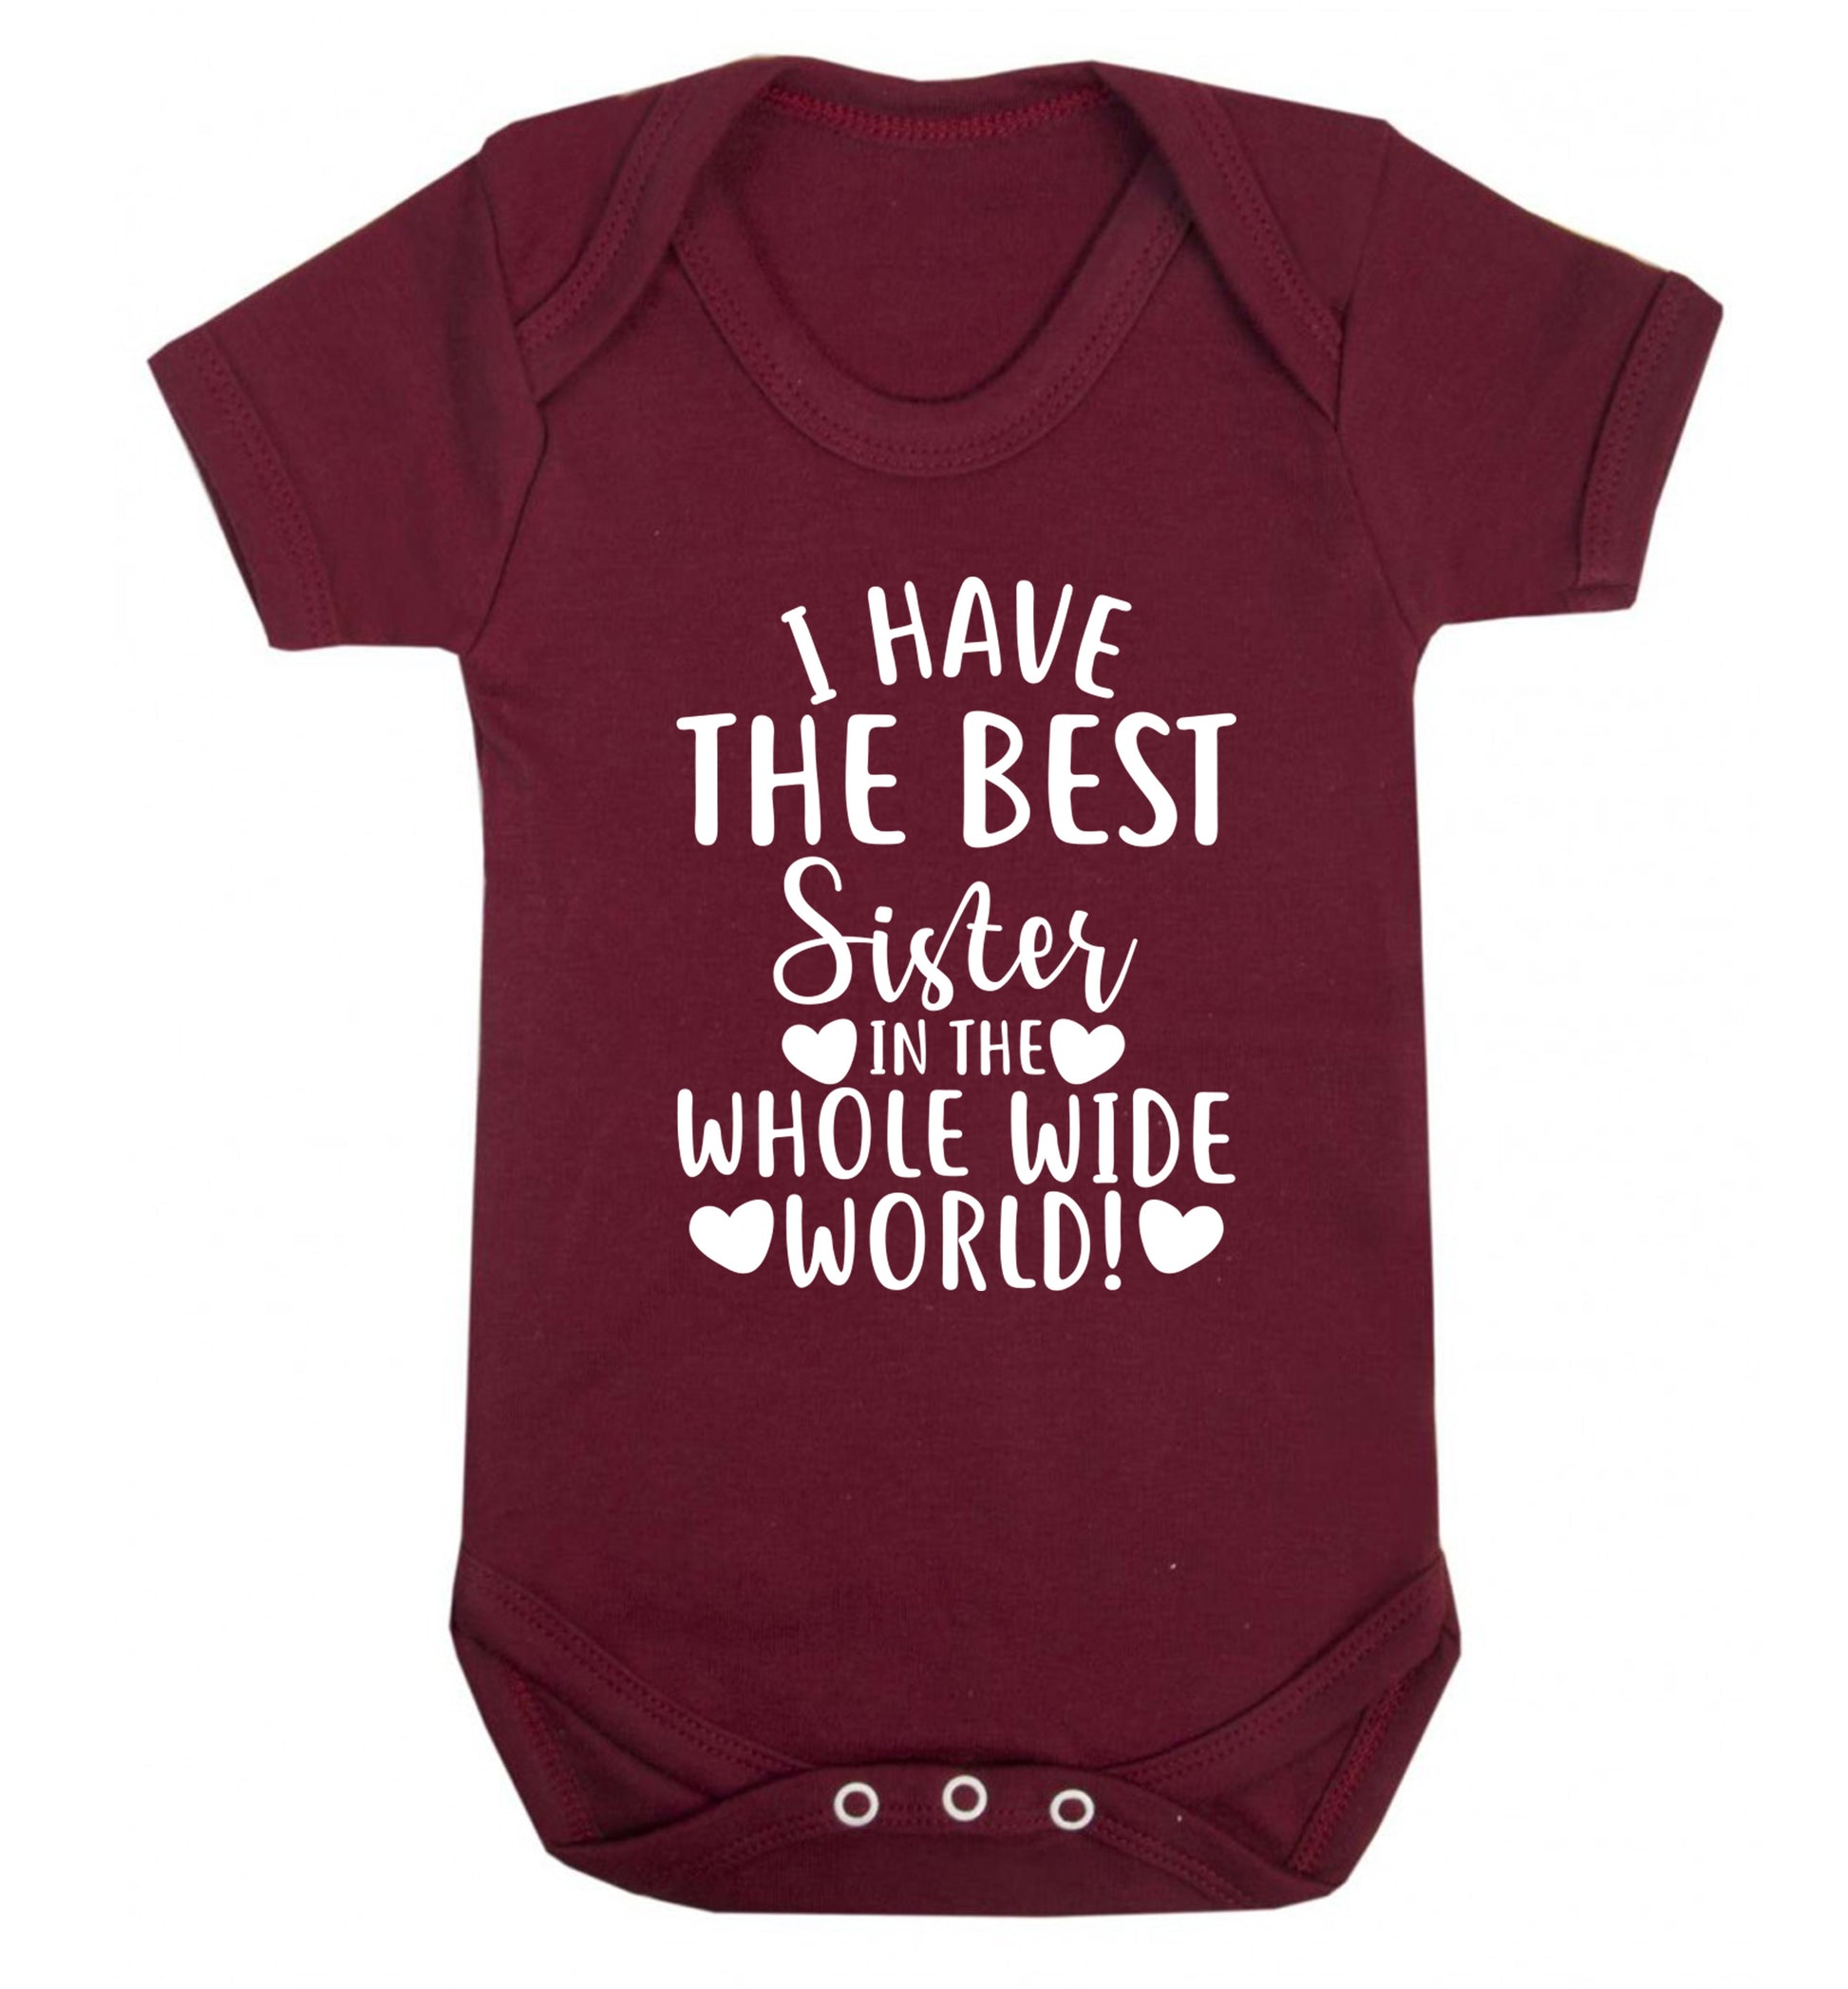 I have the best sister in the whole wide world! Baby Vest maroon 18-24 months